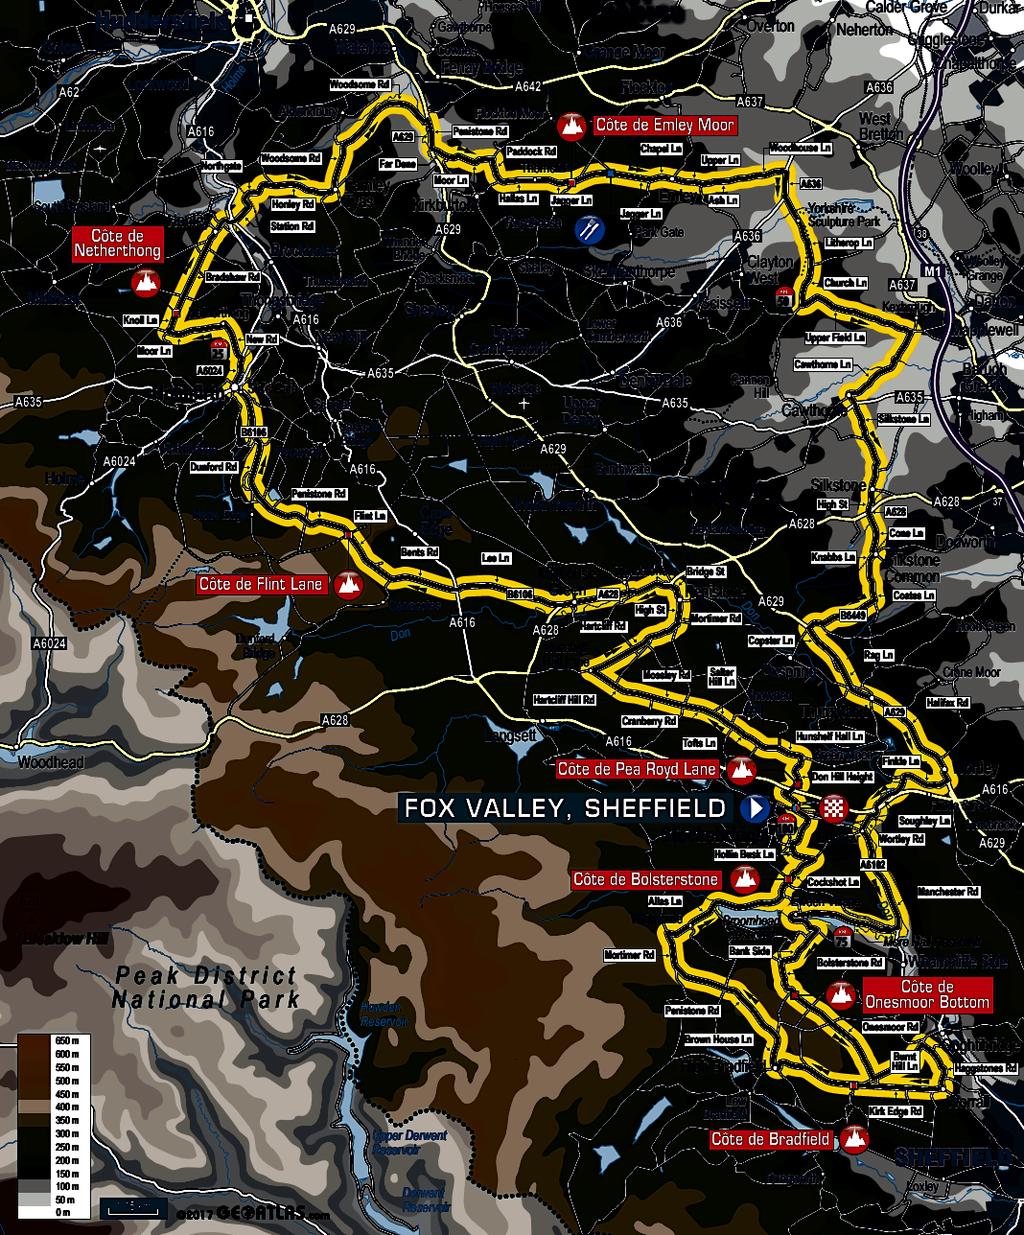 THE ROUTES & ELEVATIONS 100km LONG ROUTE